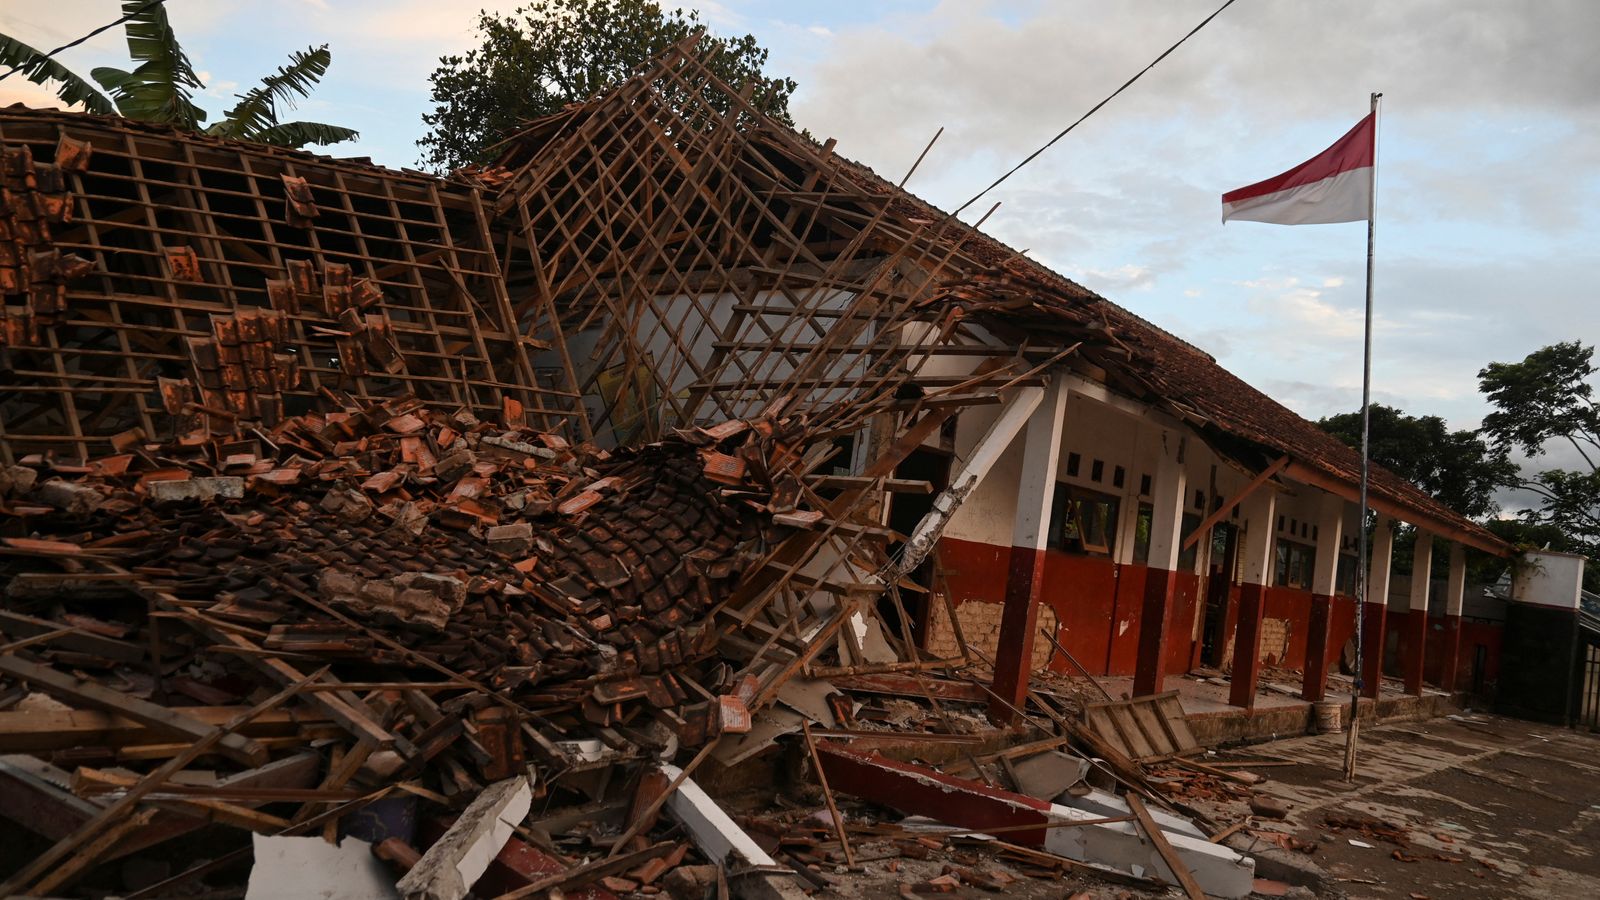 Indonesia earthquake: At least 56 people killed after 5.6 magnitude quake in West Java